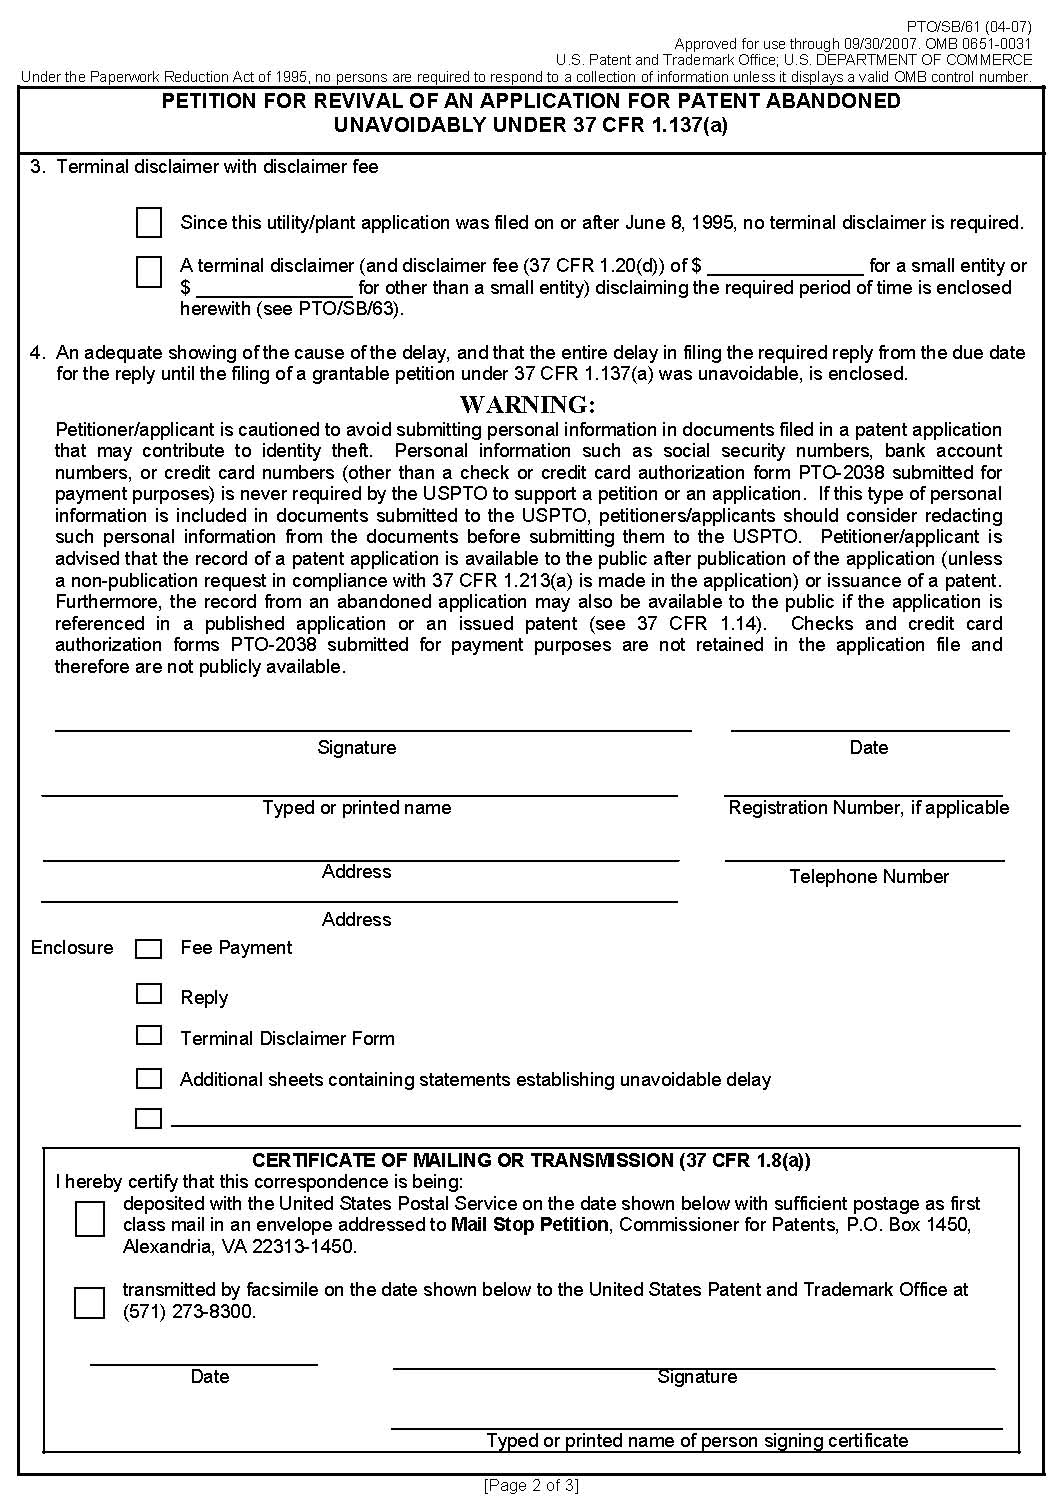 form pto/sb/61. petition for revival of an application for patent abandoned unavoidably under 37 cfr 1.137(a) [page 2 of 3]